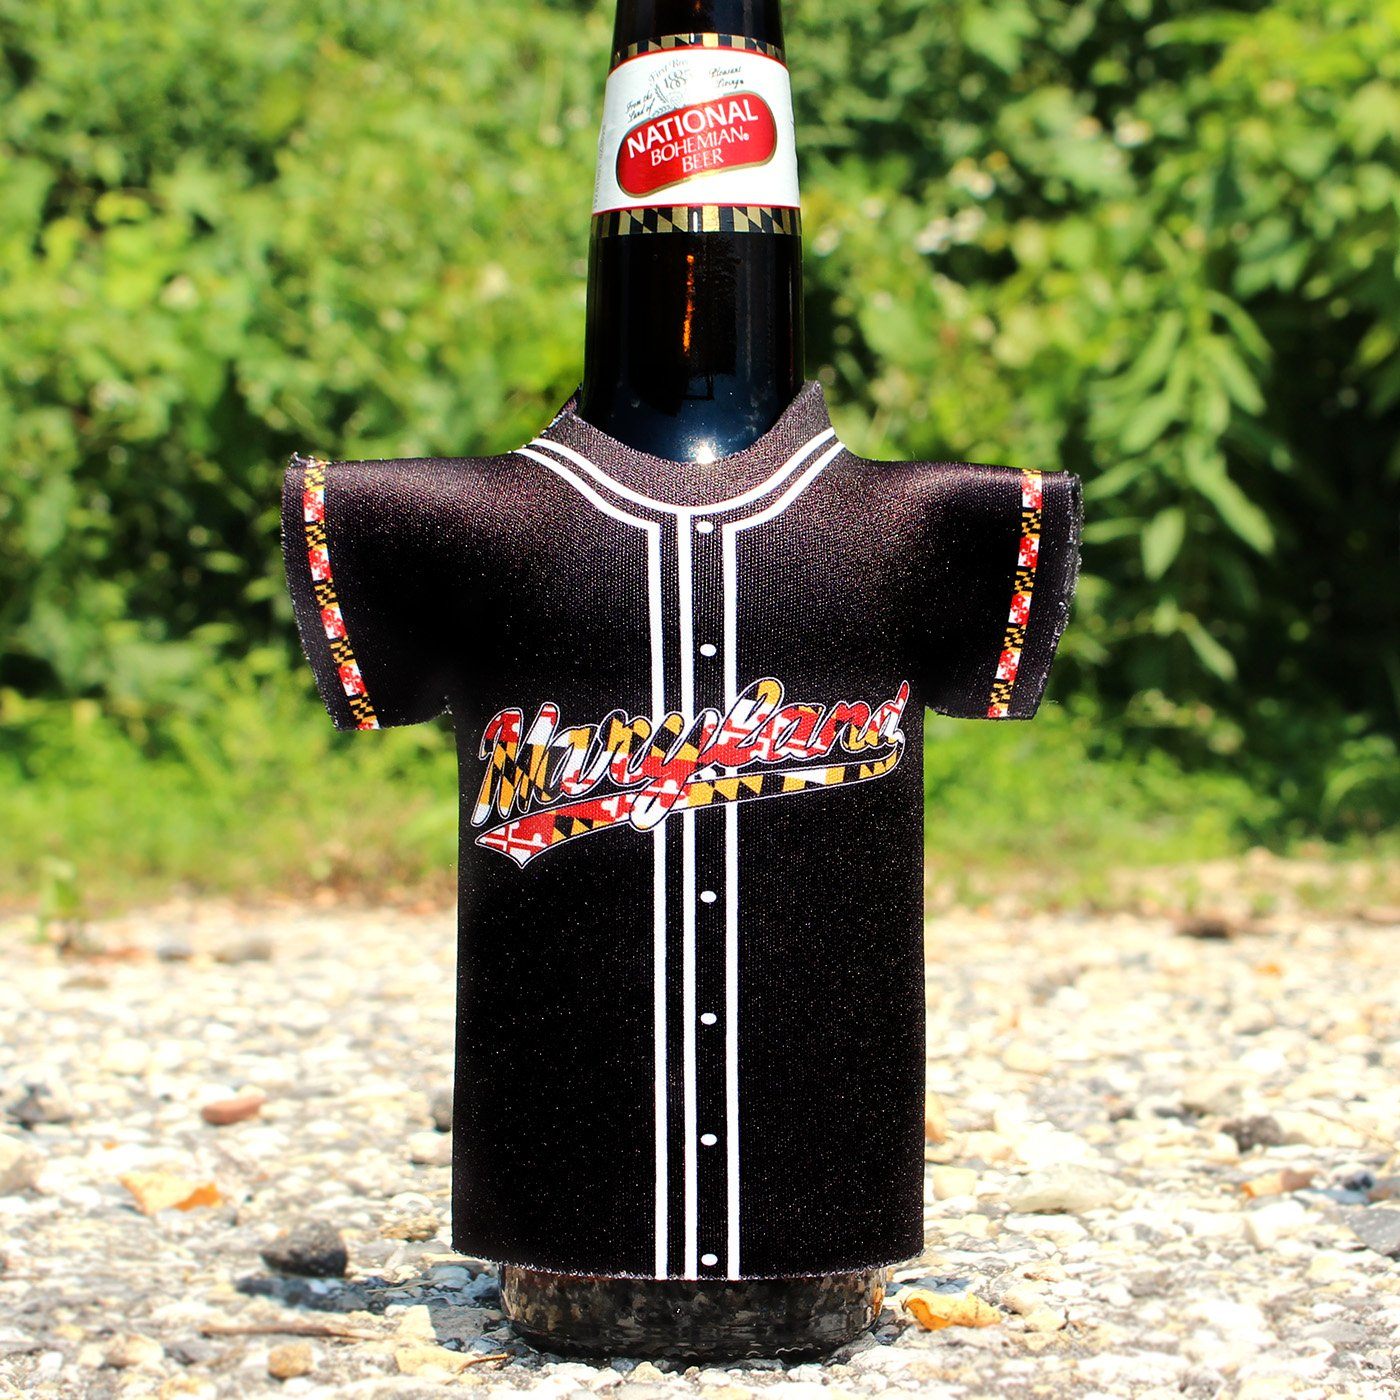 Maryland Flag Jersey / Bottle Cooler - Route One Apparel